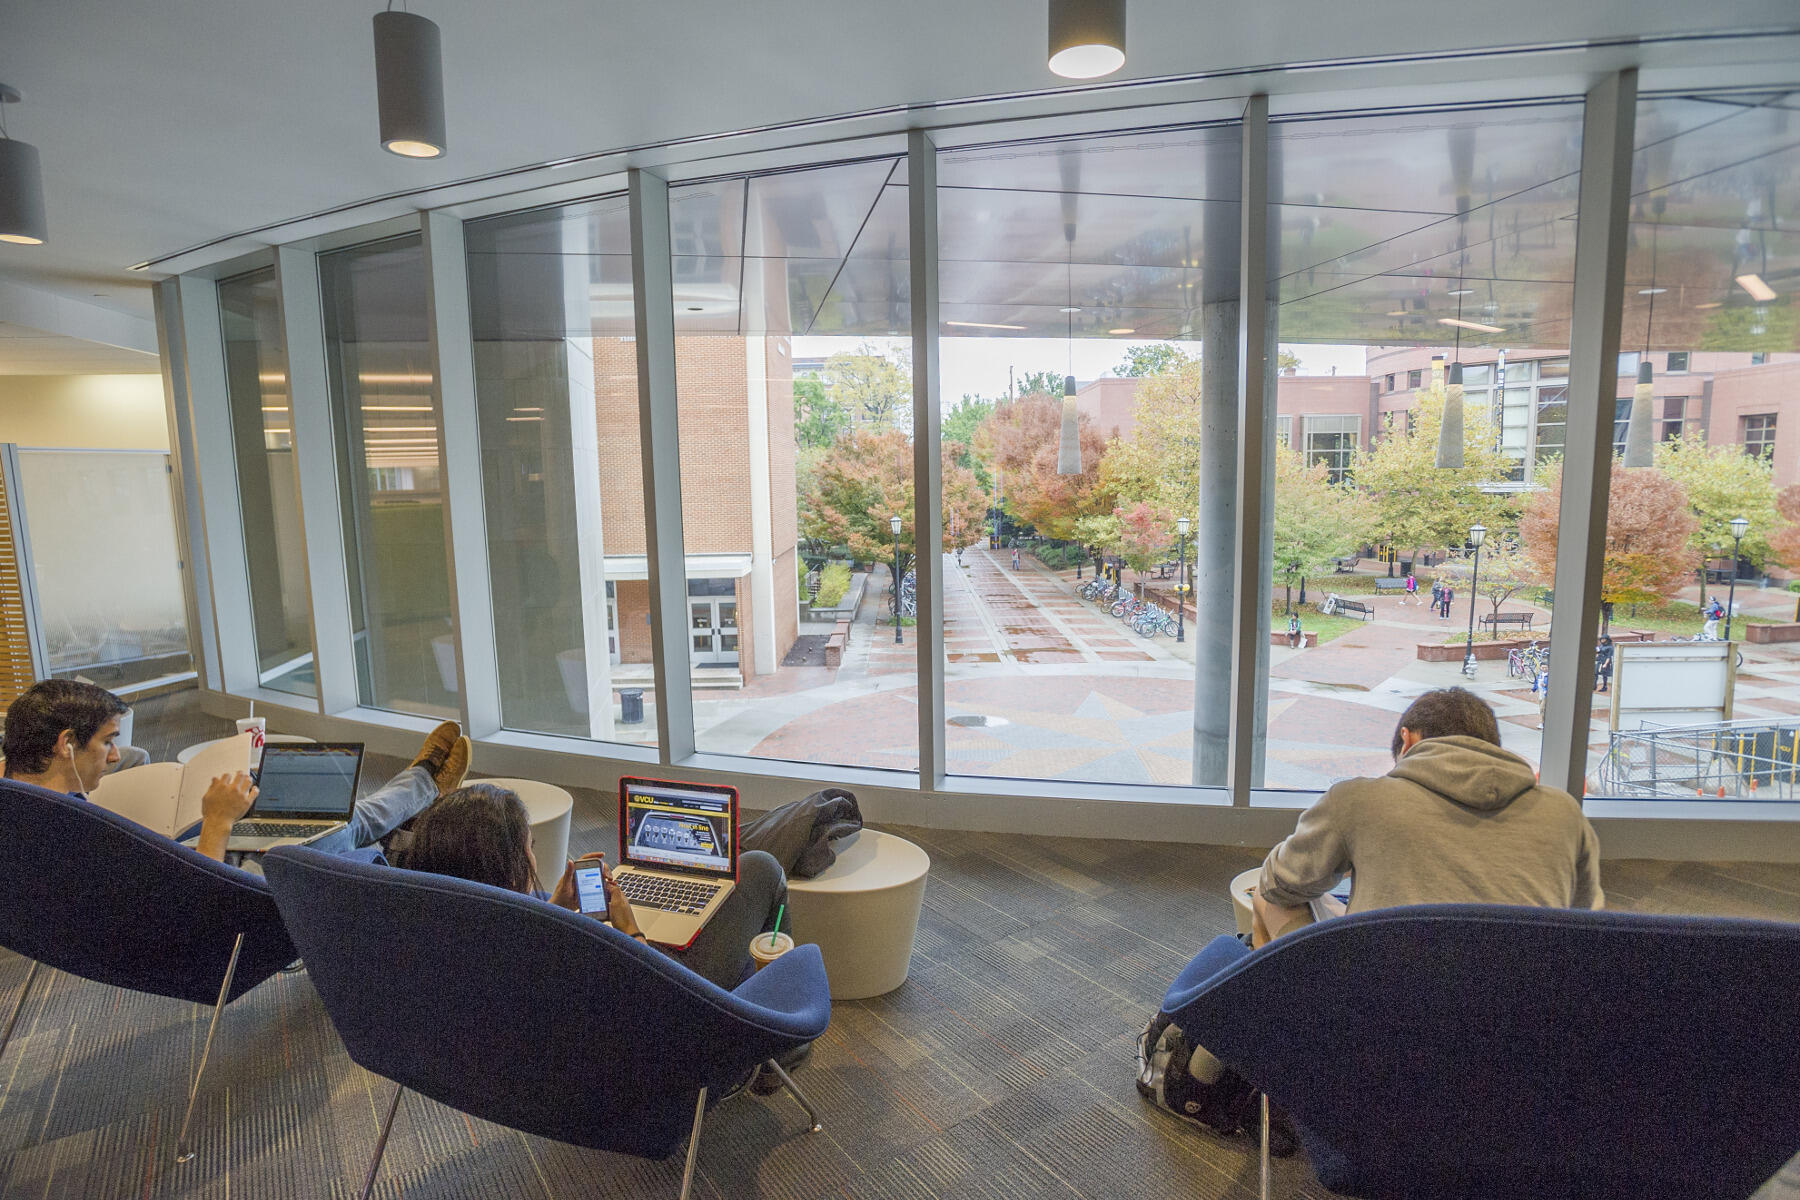 On Monday, students studied on the new library's second floor, overlooking the Compass.